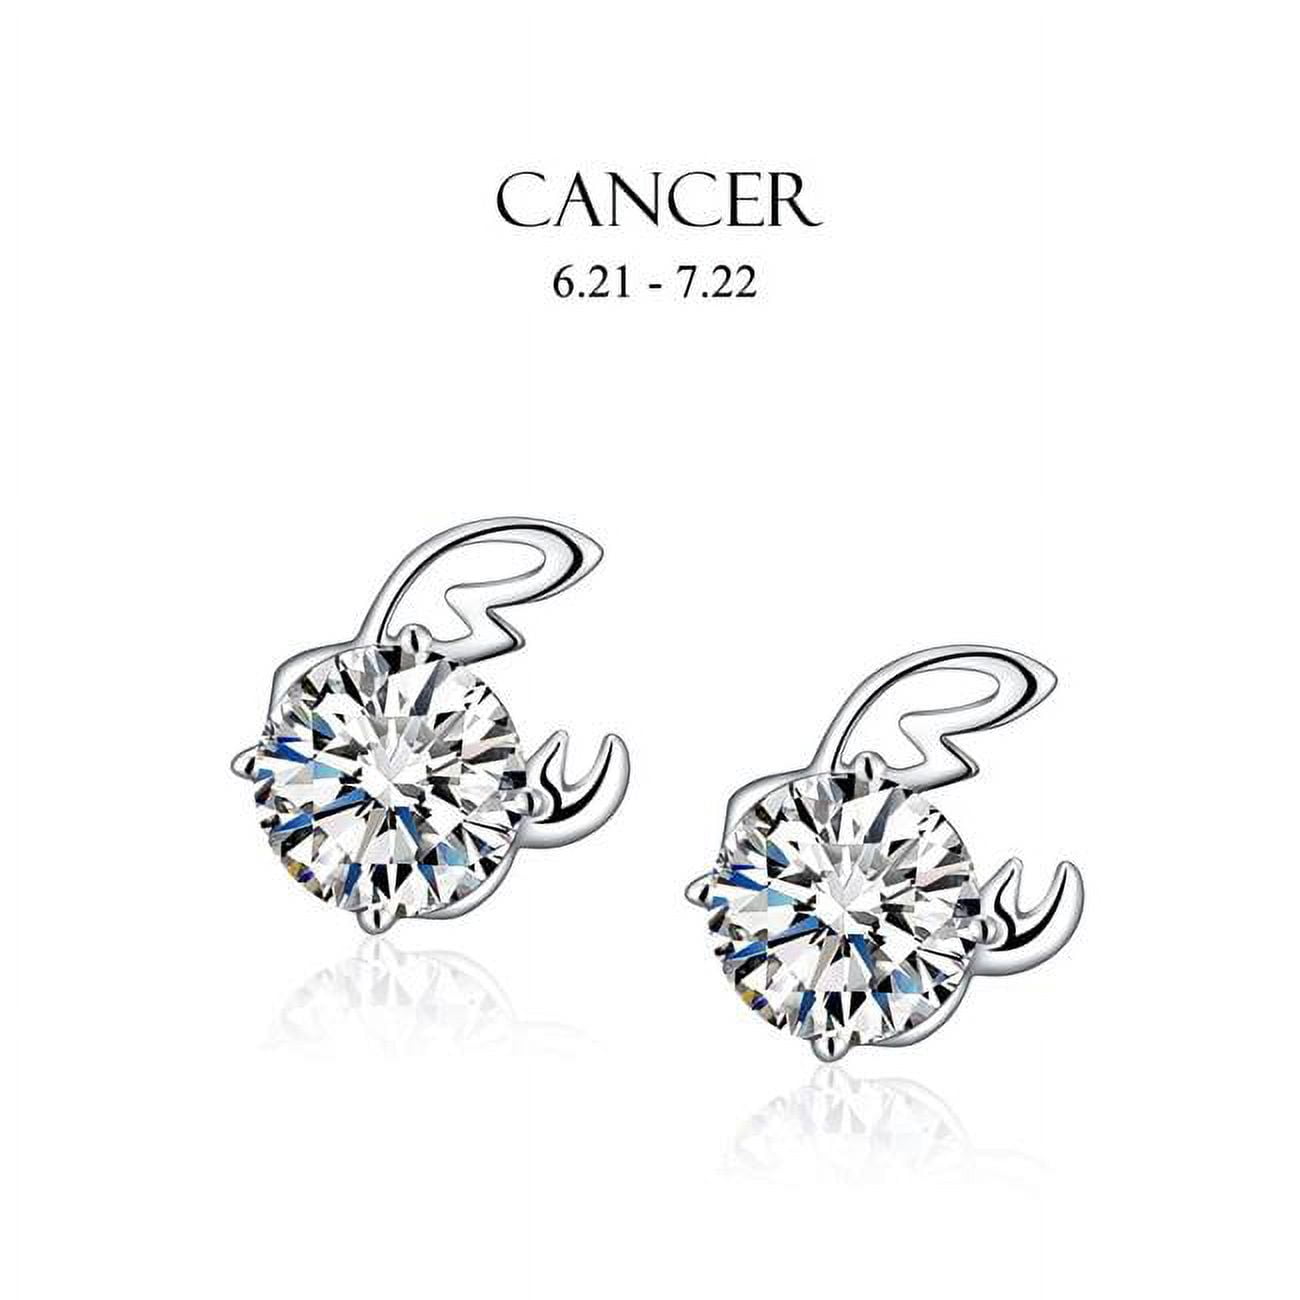 Picture of Amabel Designs E-I2CZCNR-RDM Rhodium Cubic Zirconia Cancer Stud Earrings